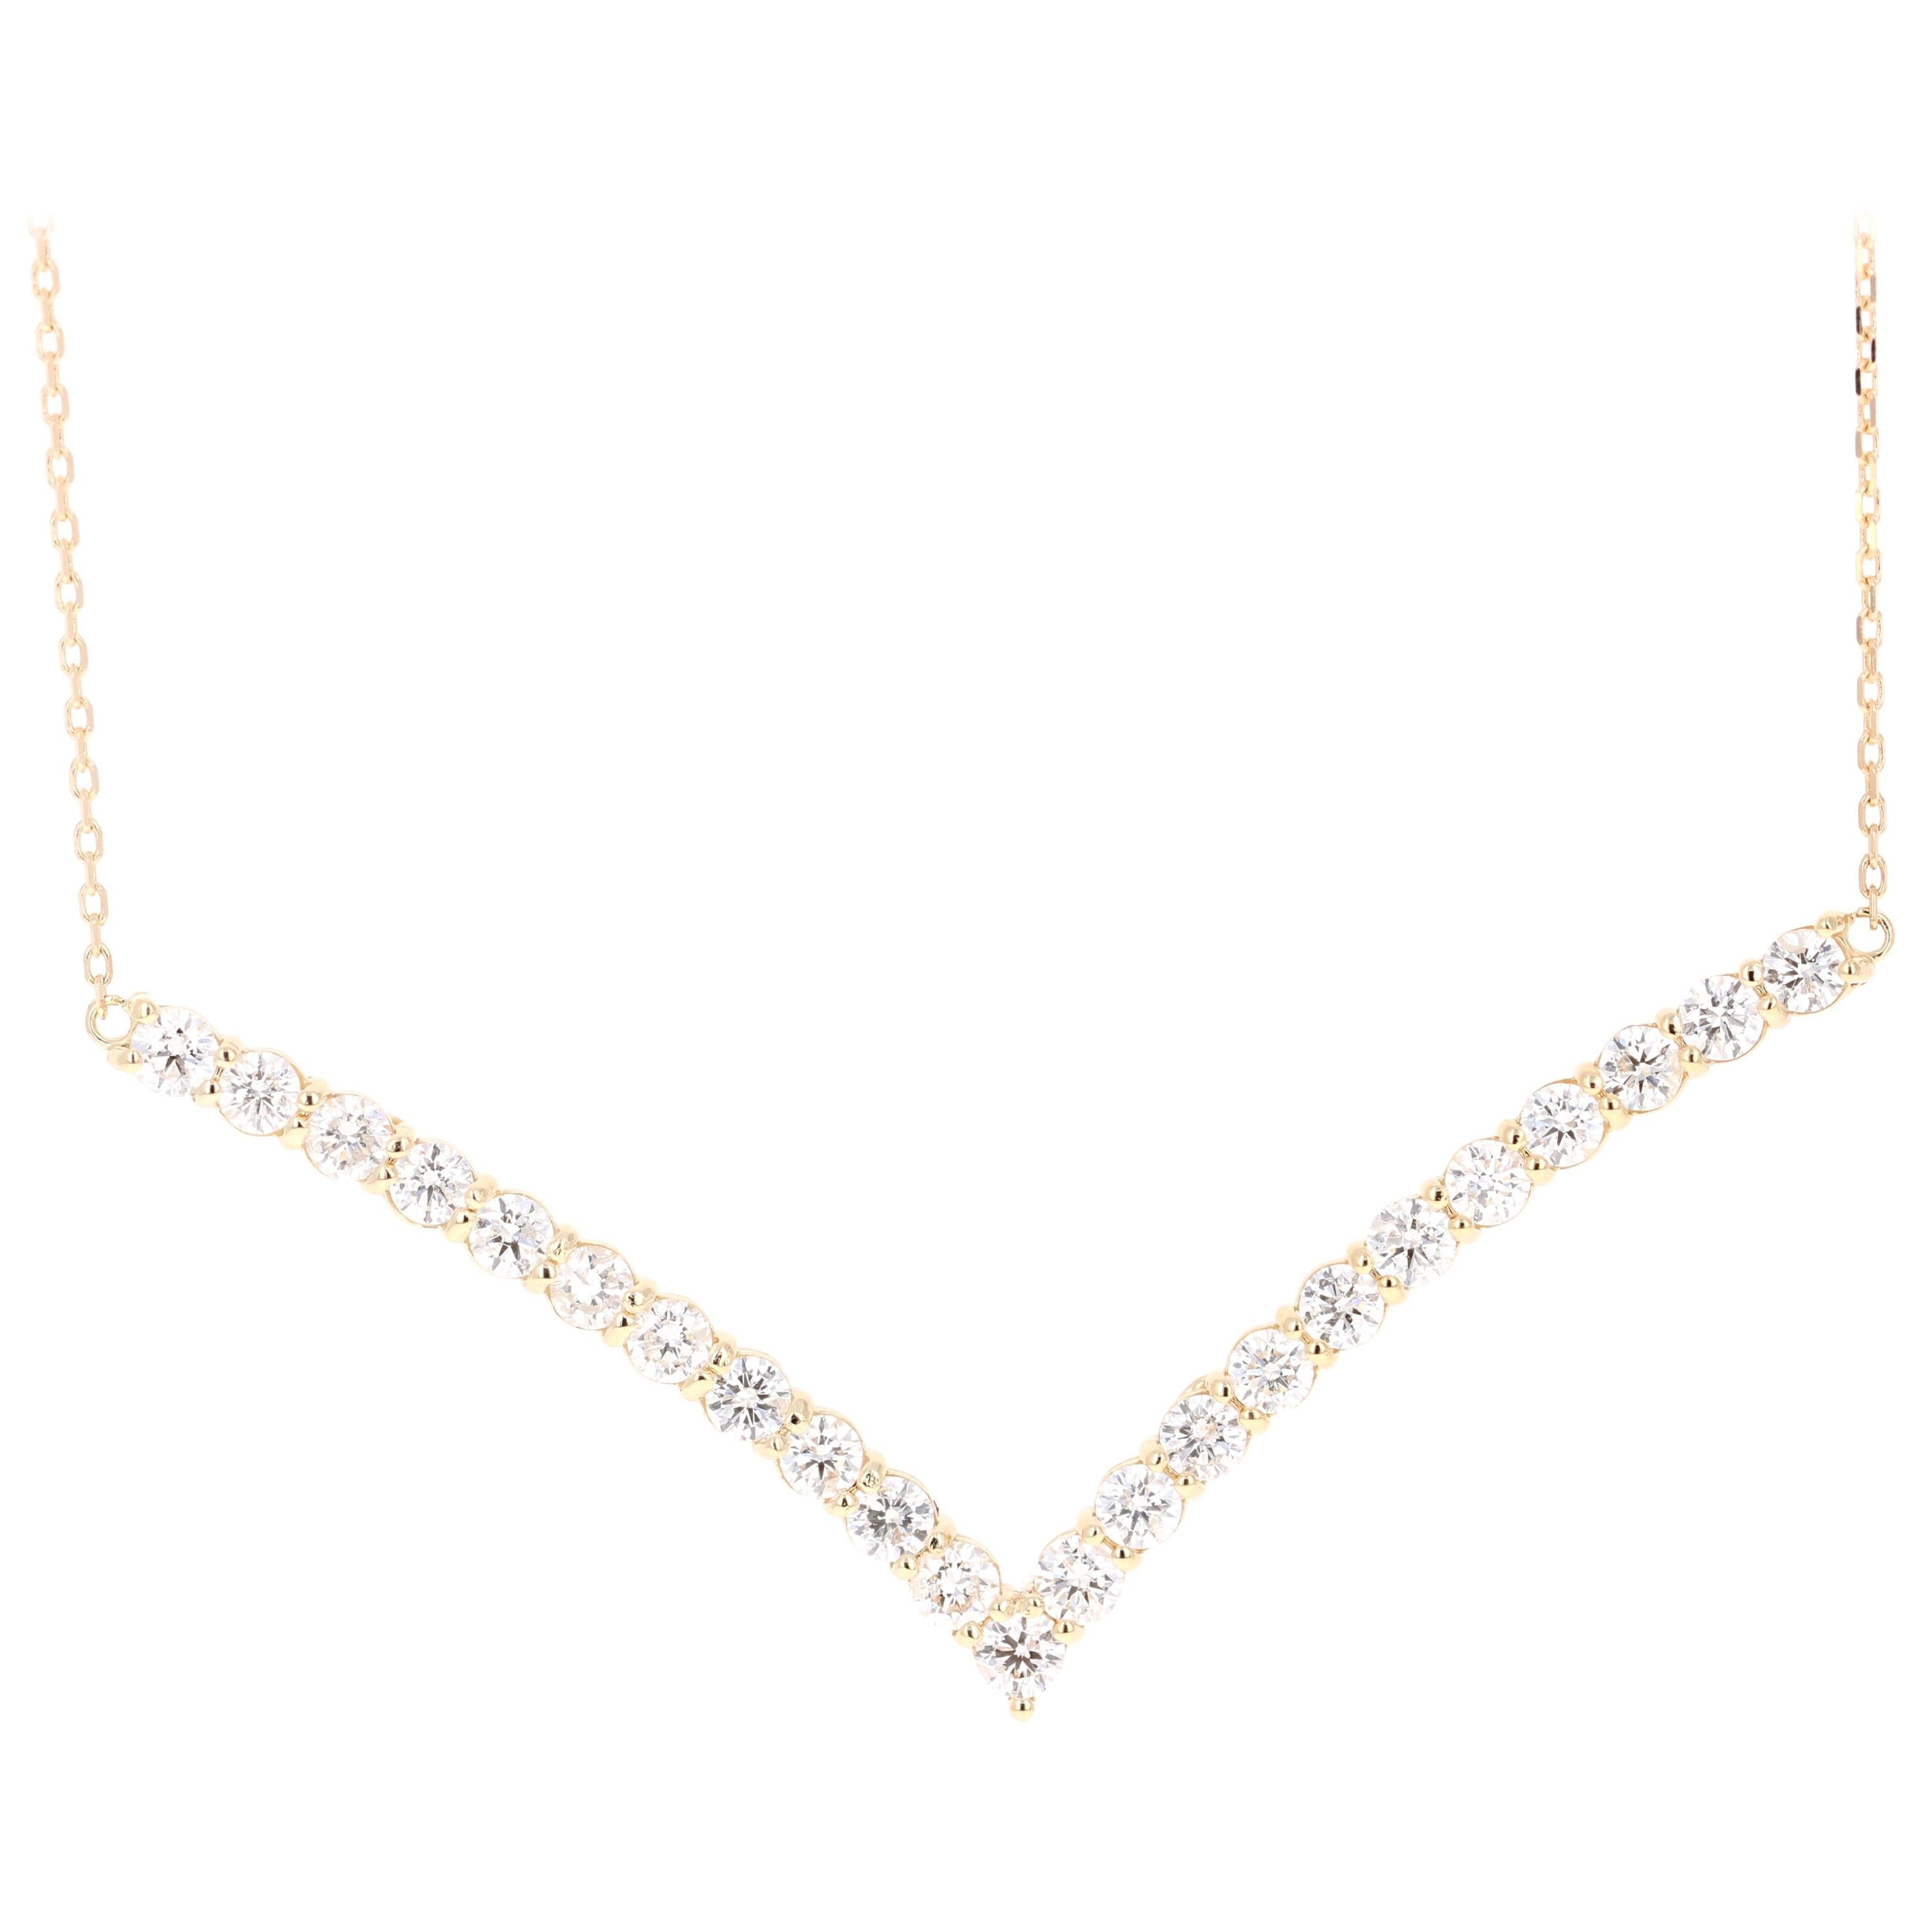 2.09 Carat Diamond Yellow Gold Chain Necklace For Sale